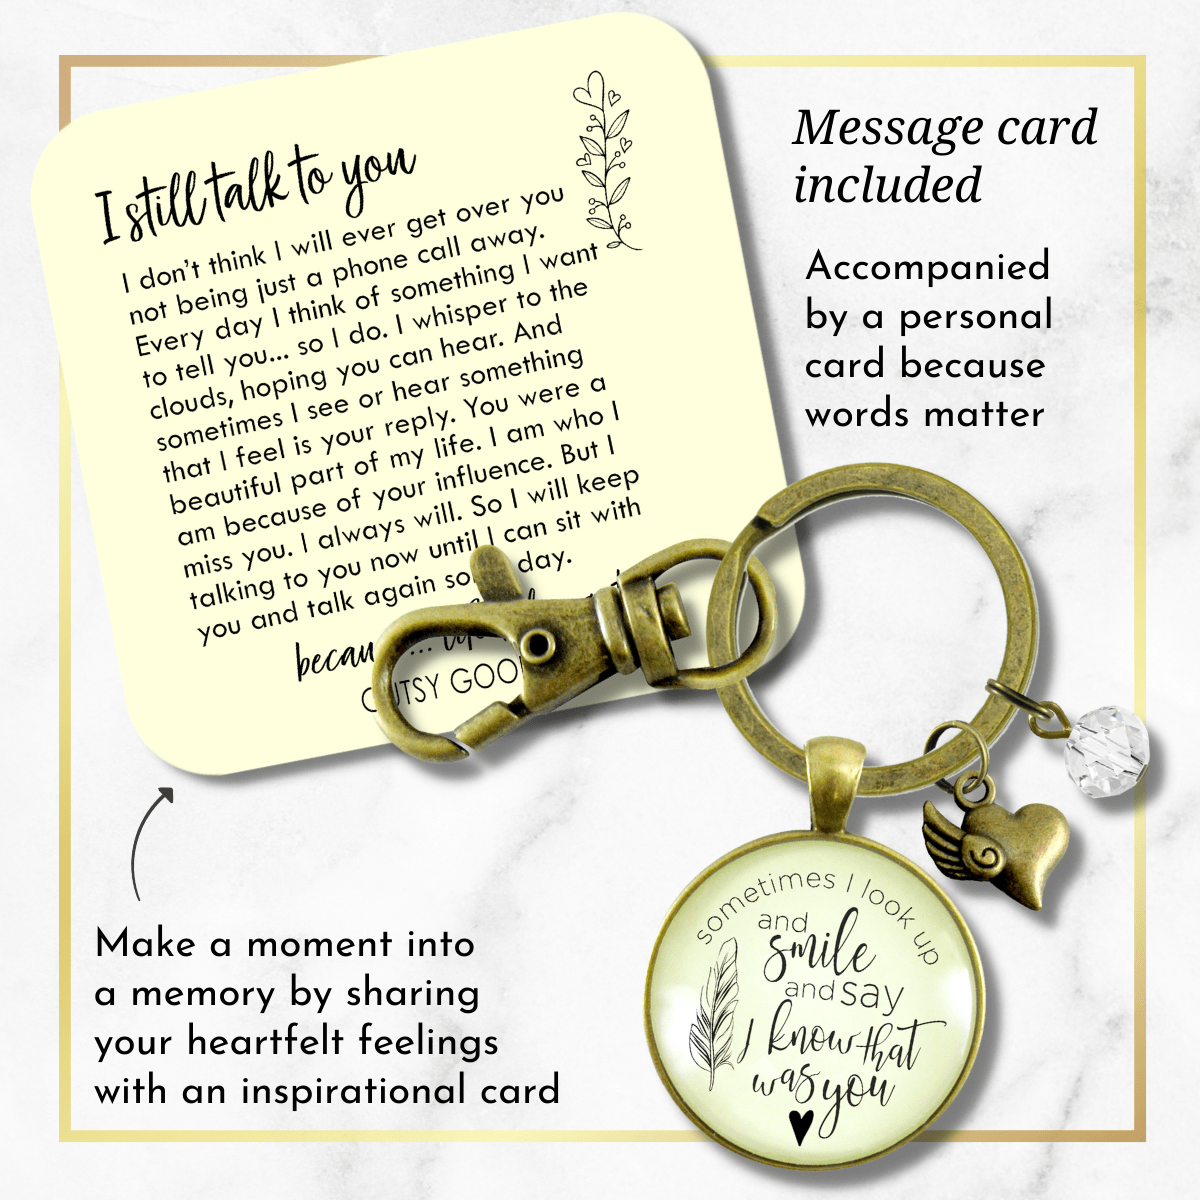 Metal Field Shop Handmade Keychain DIY Keyring Extention,Unique Gifts for Friends,New Year,Christmas